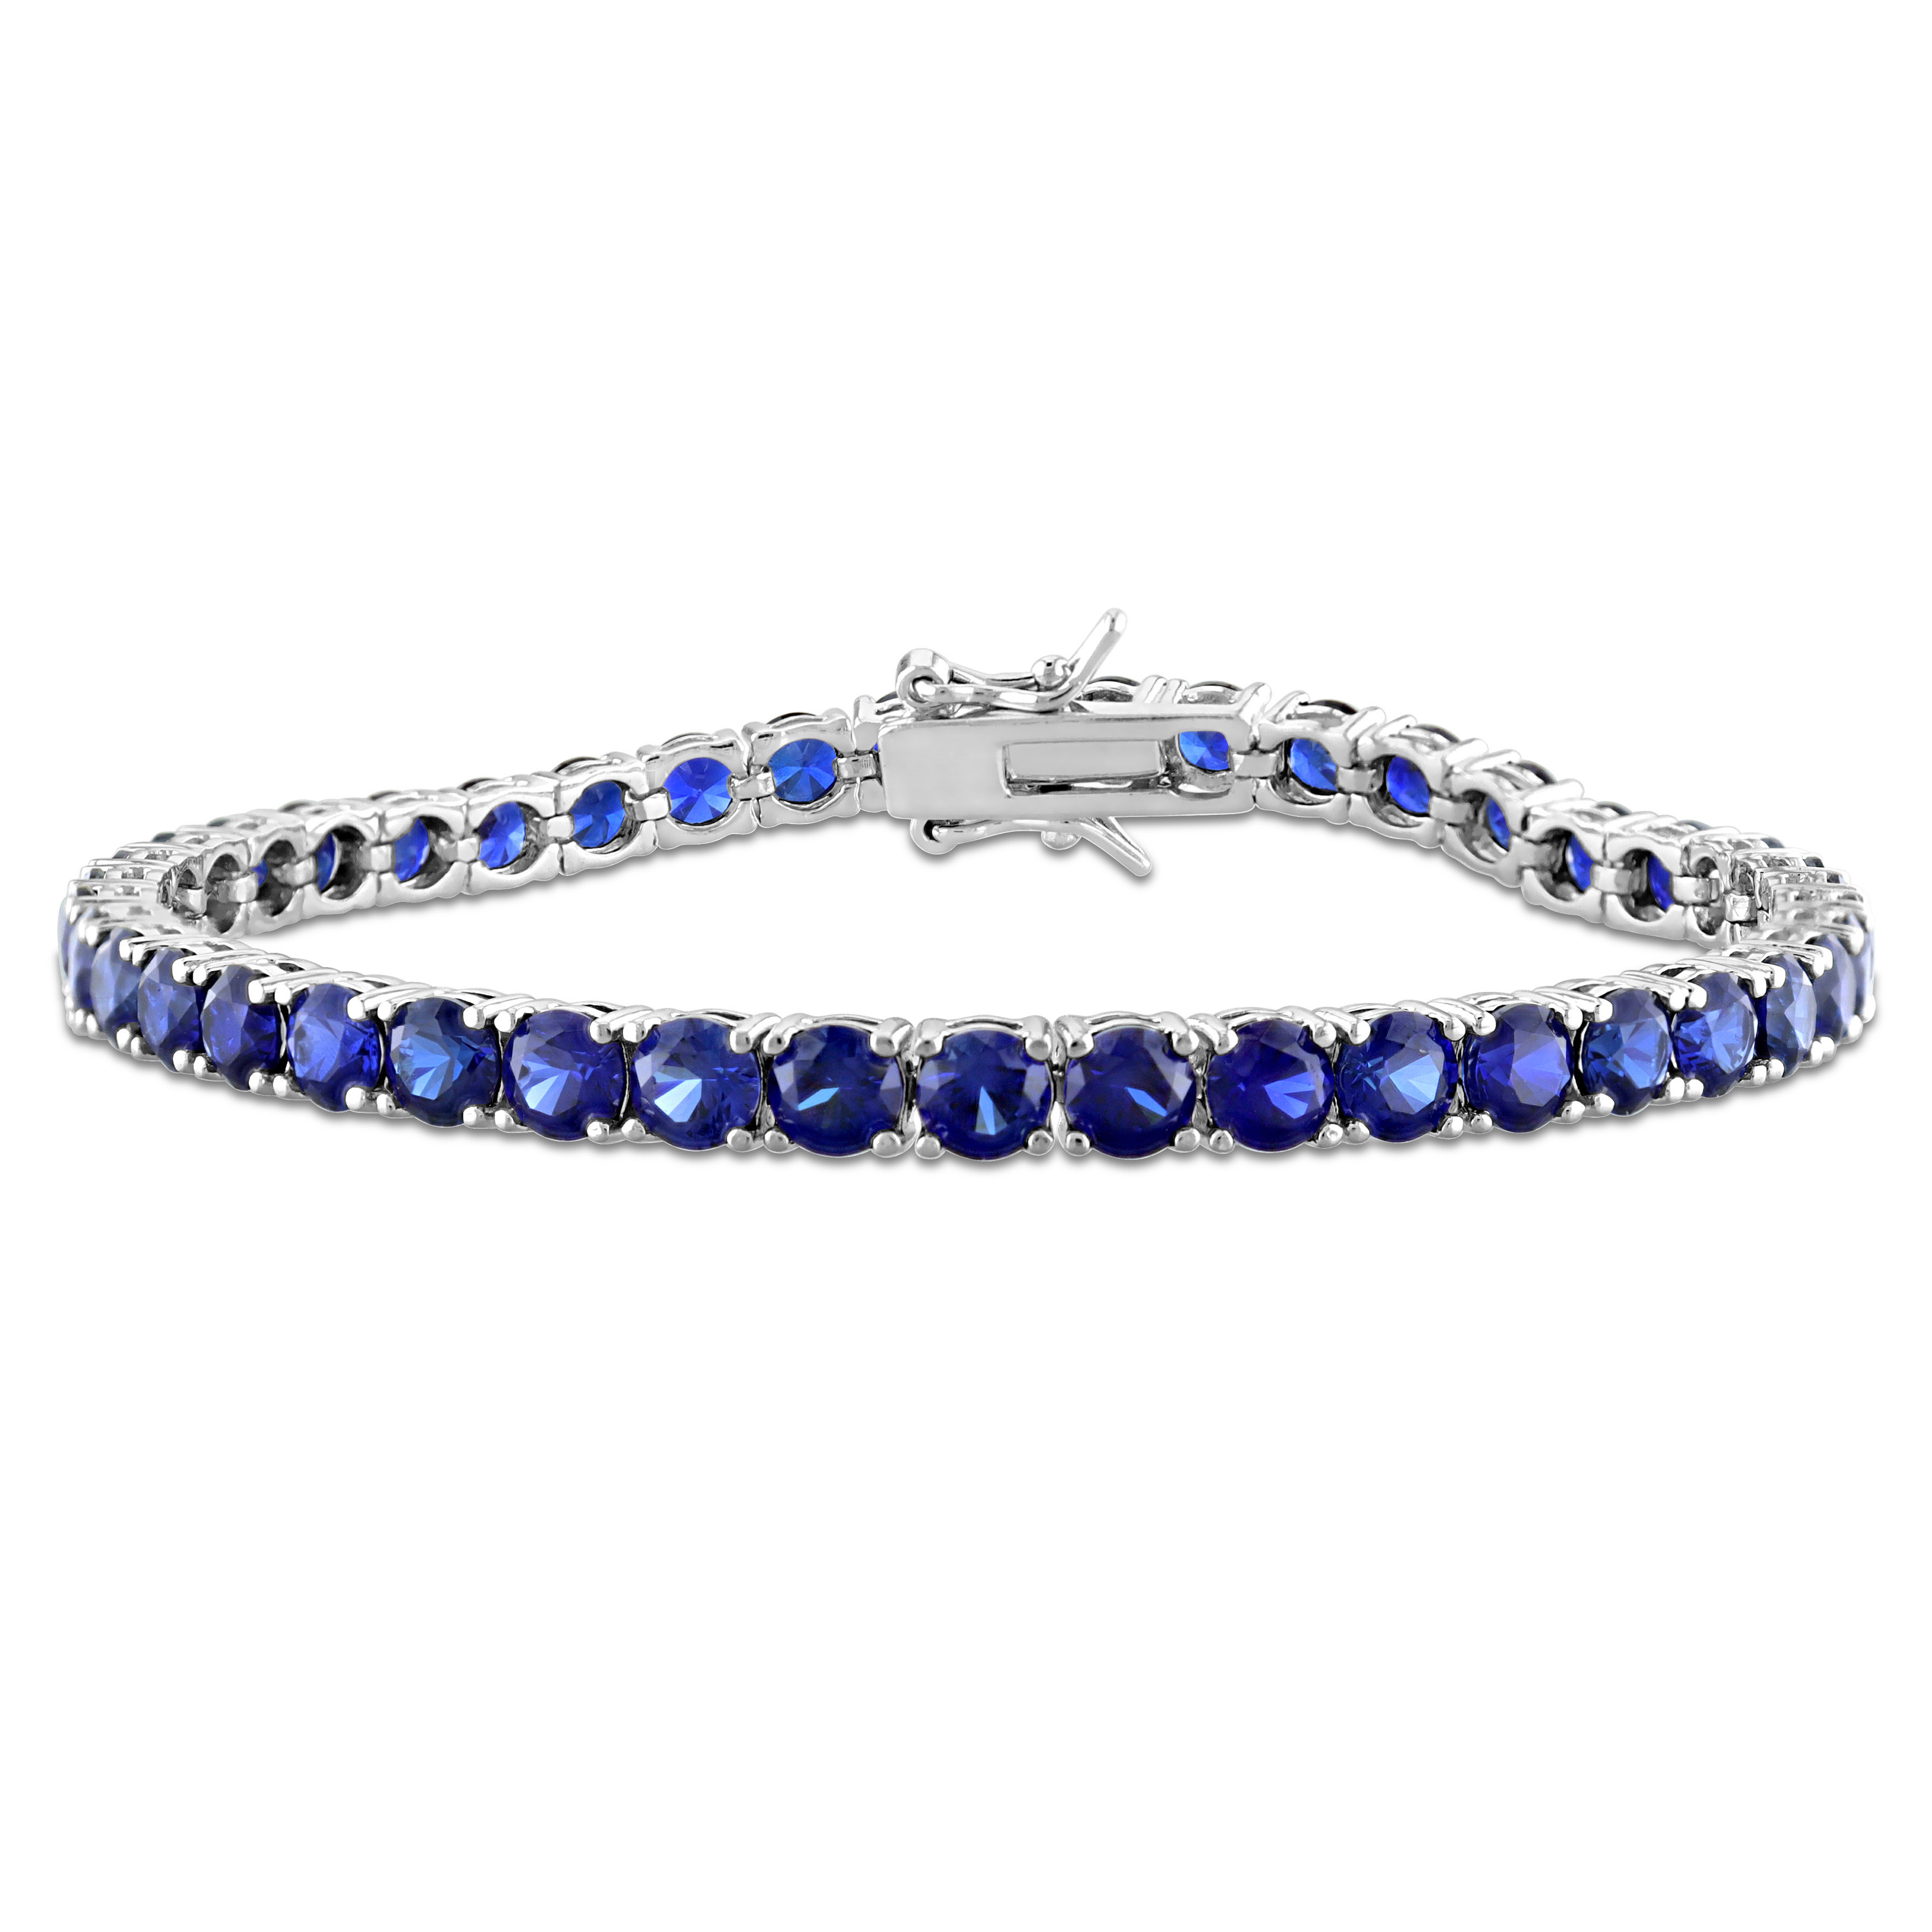 14 1/2 CT TGW Created Blue Sapphire Classic Tennis Bracelet in Sterling Silver - 7.25 in.